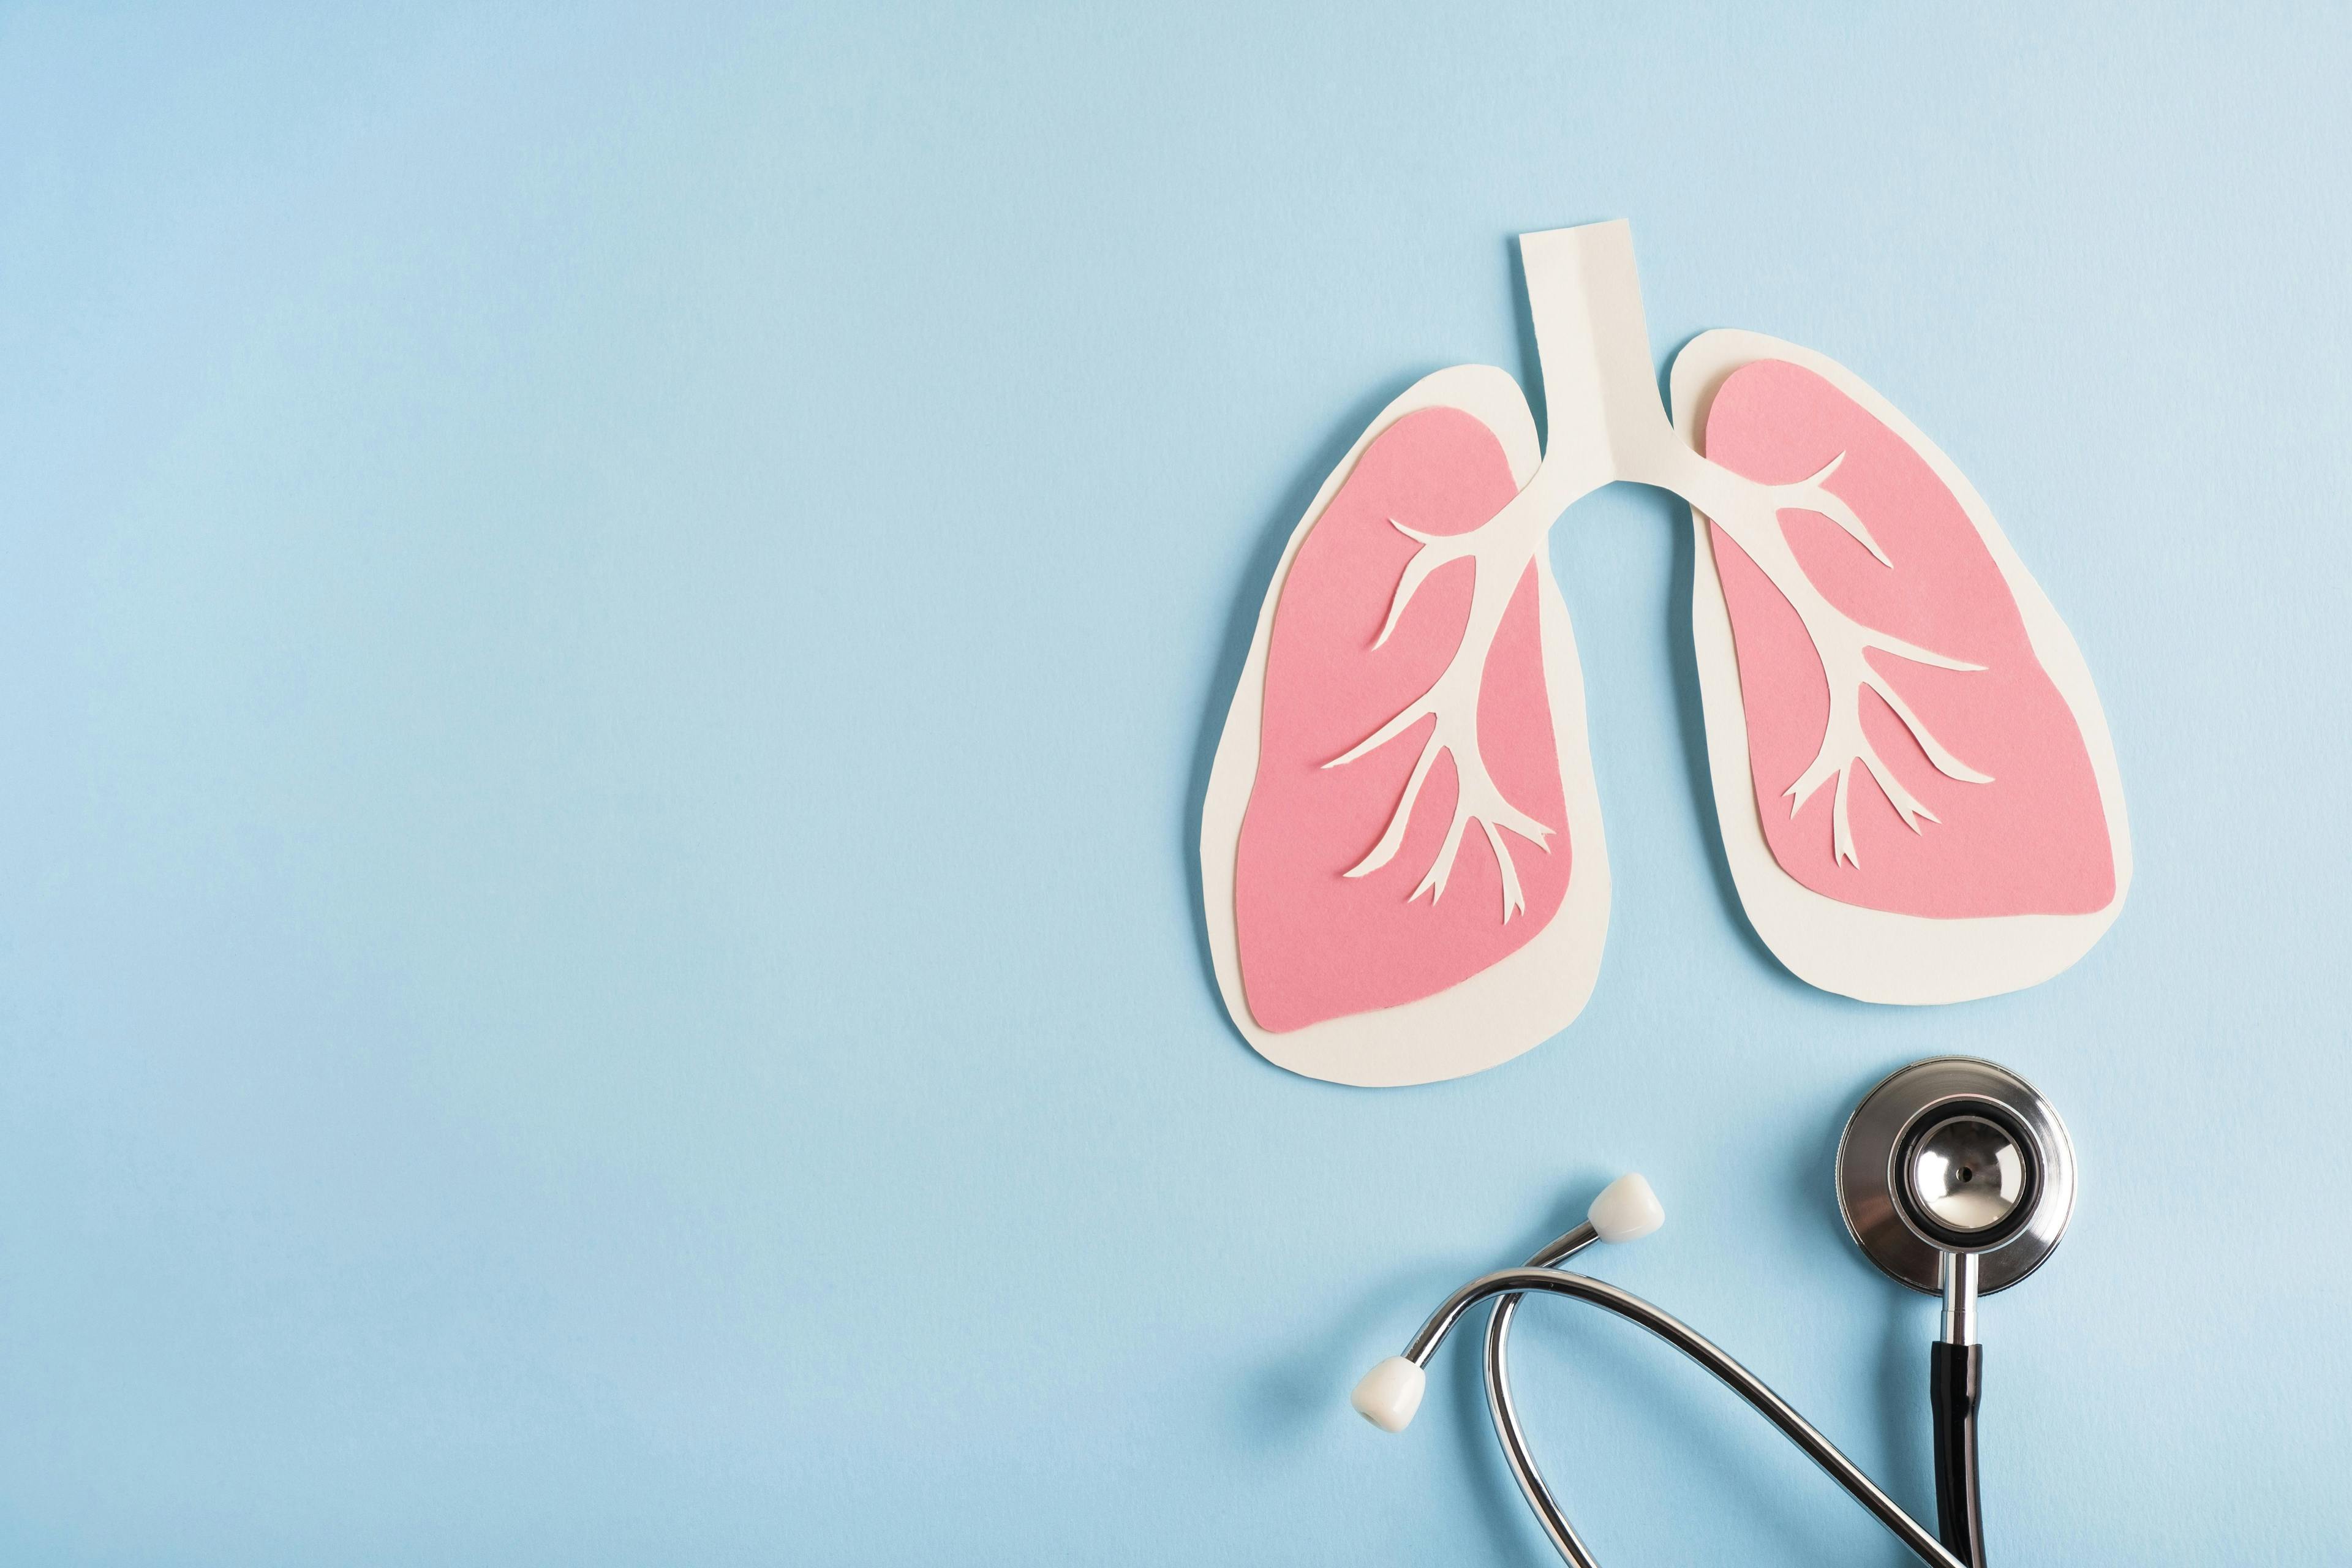 First Double-Lung Transplants in Advanced Lung Cancer